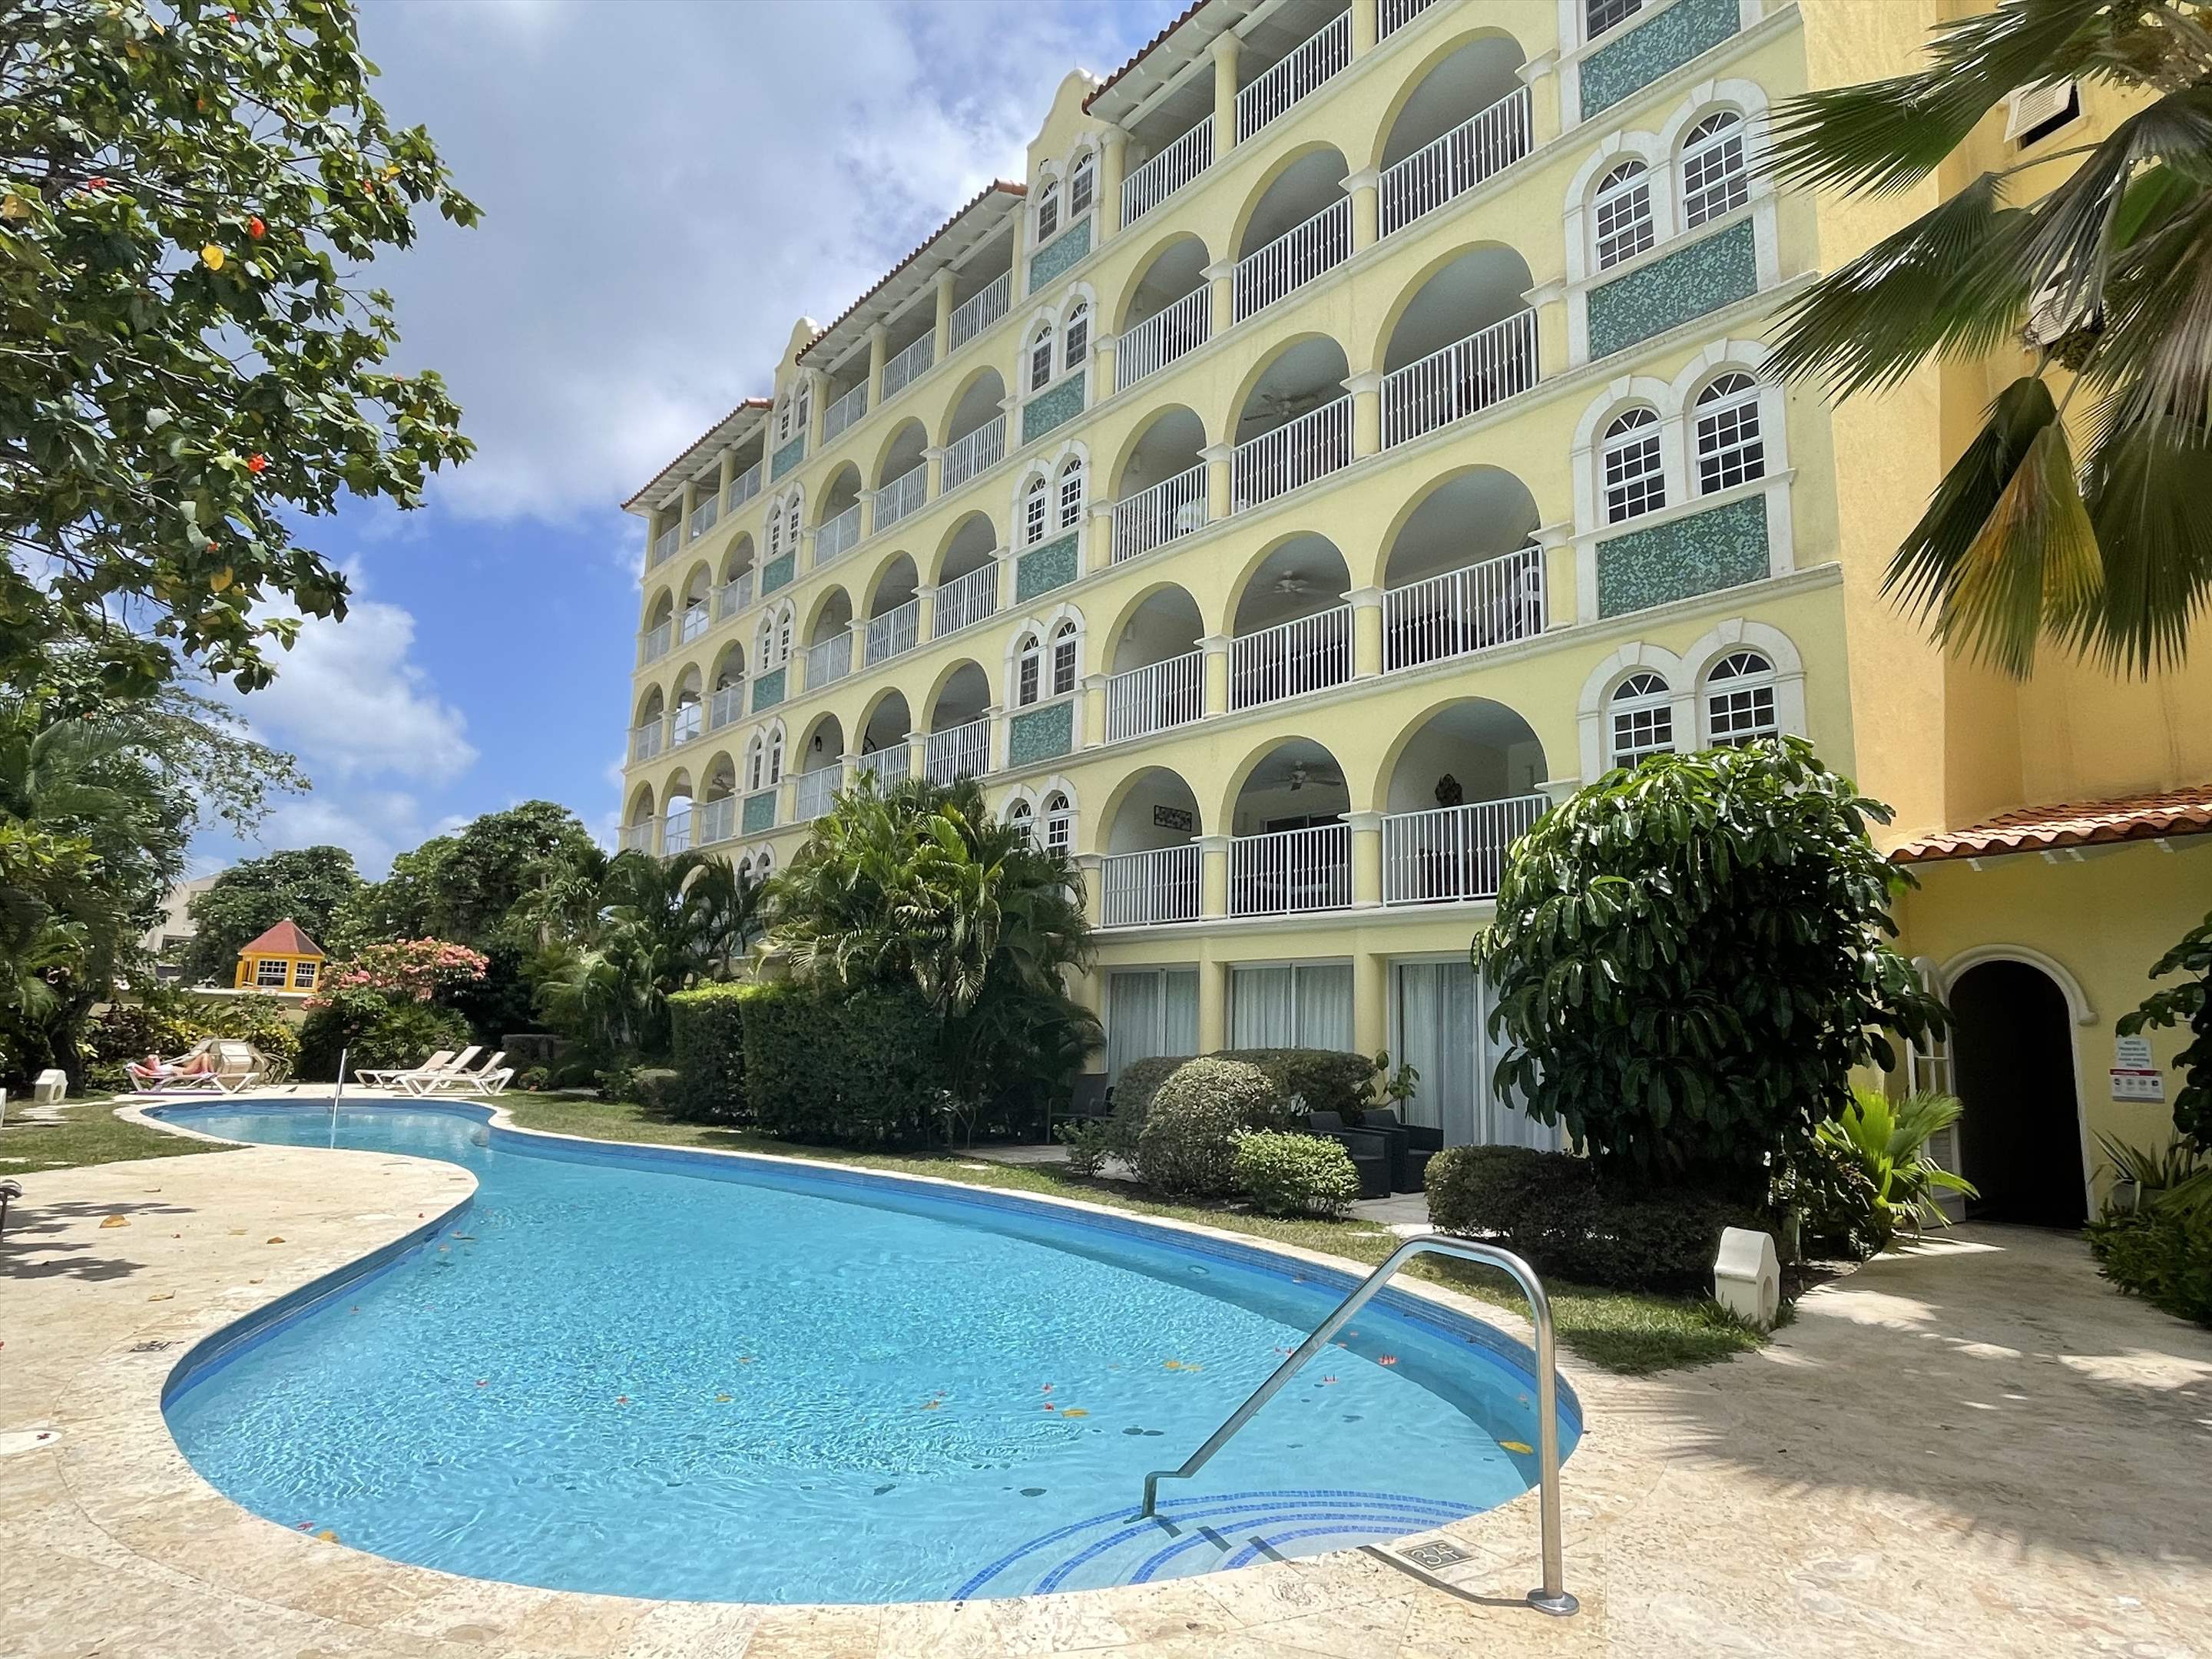 Sapphire Beach 505 , 3 Bedroom , 3 bedroom apartment in St. Lawrence Gap & South Coast, Barbados Photo #1